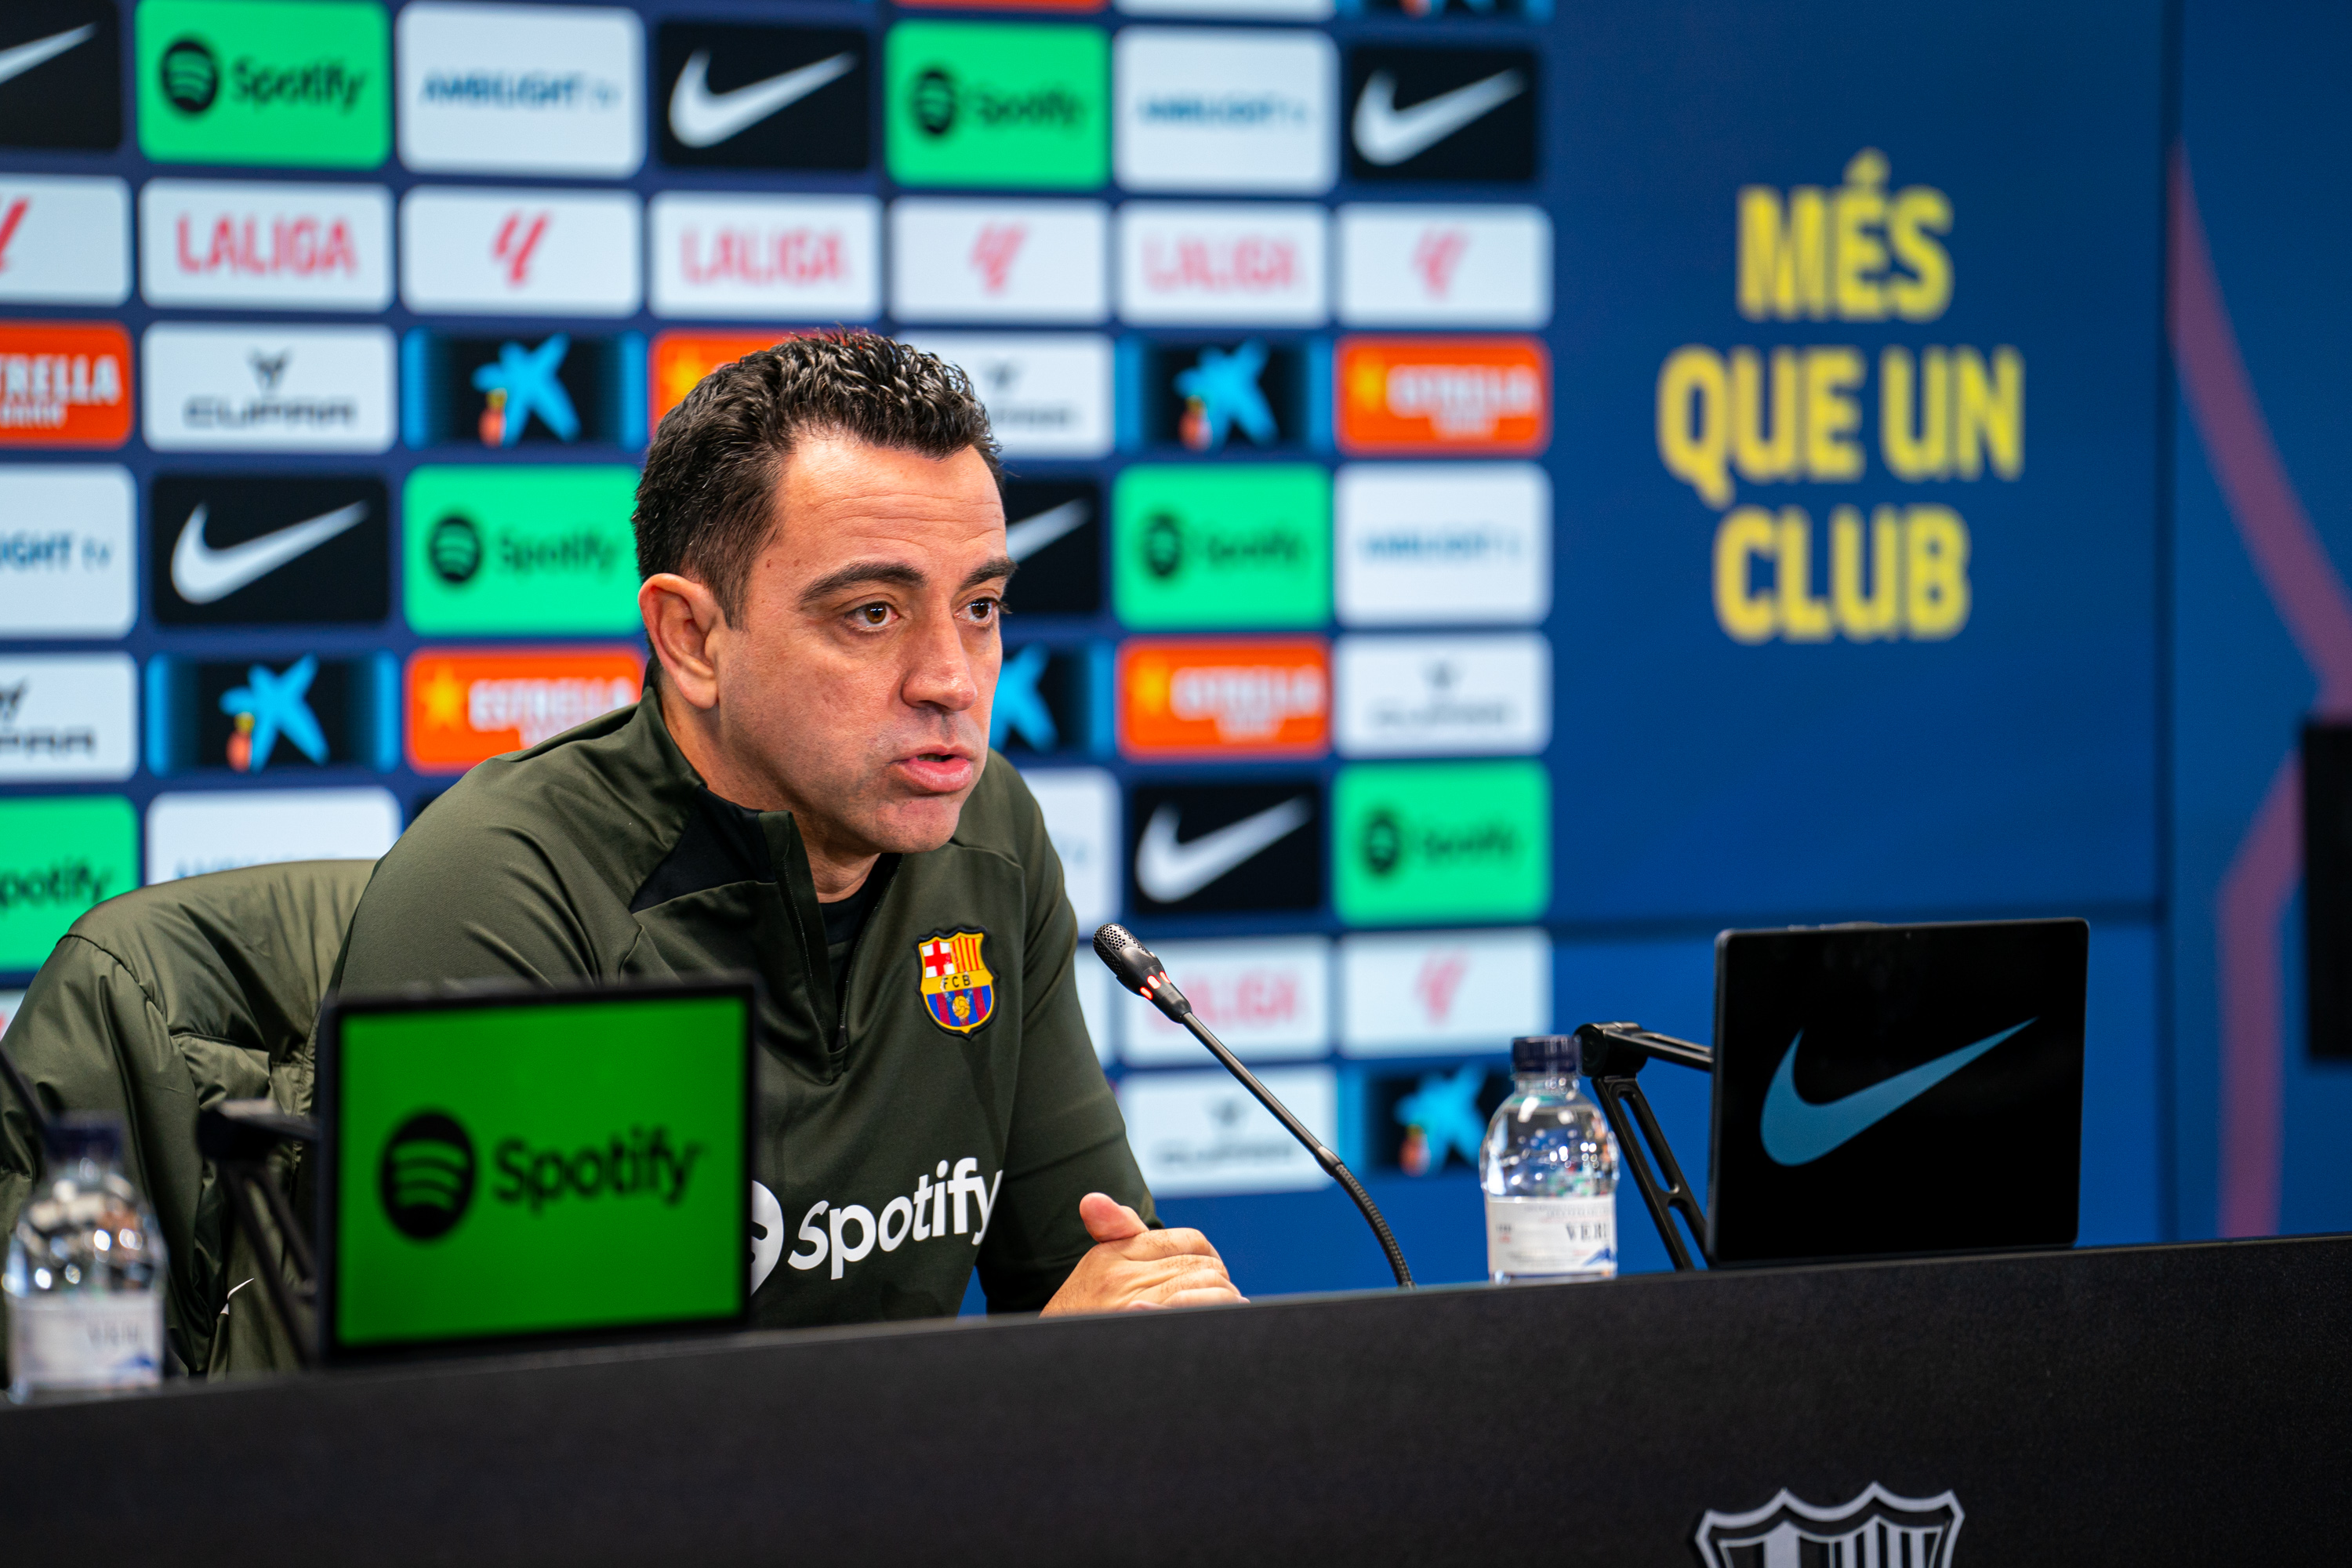 “I don’t tolerate lying” – Xavi Hernandez speaks out amid reports of lawsuits filed against journalists